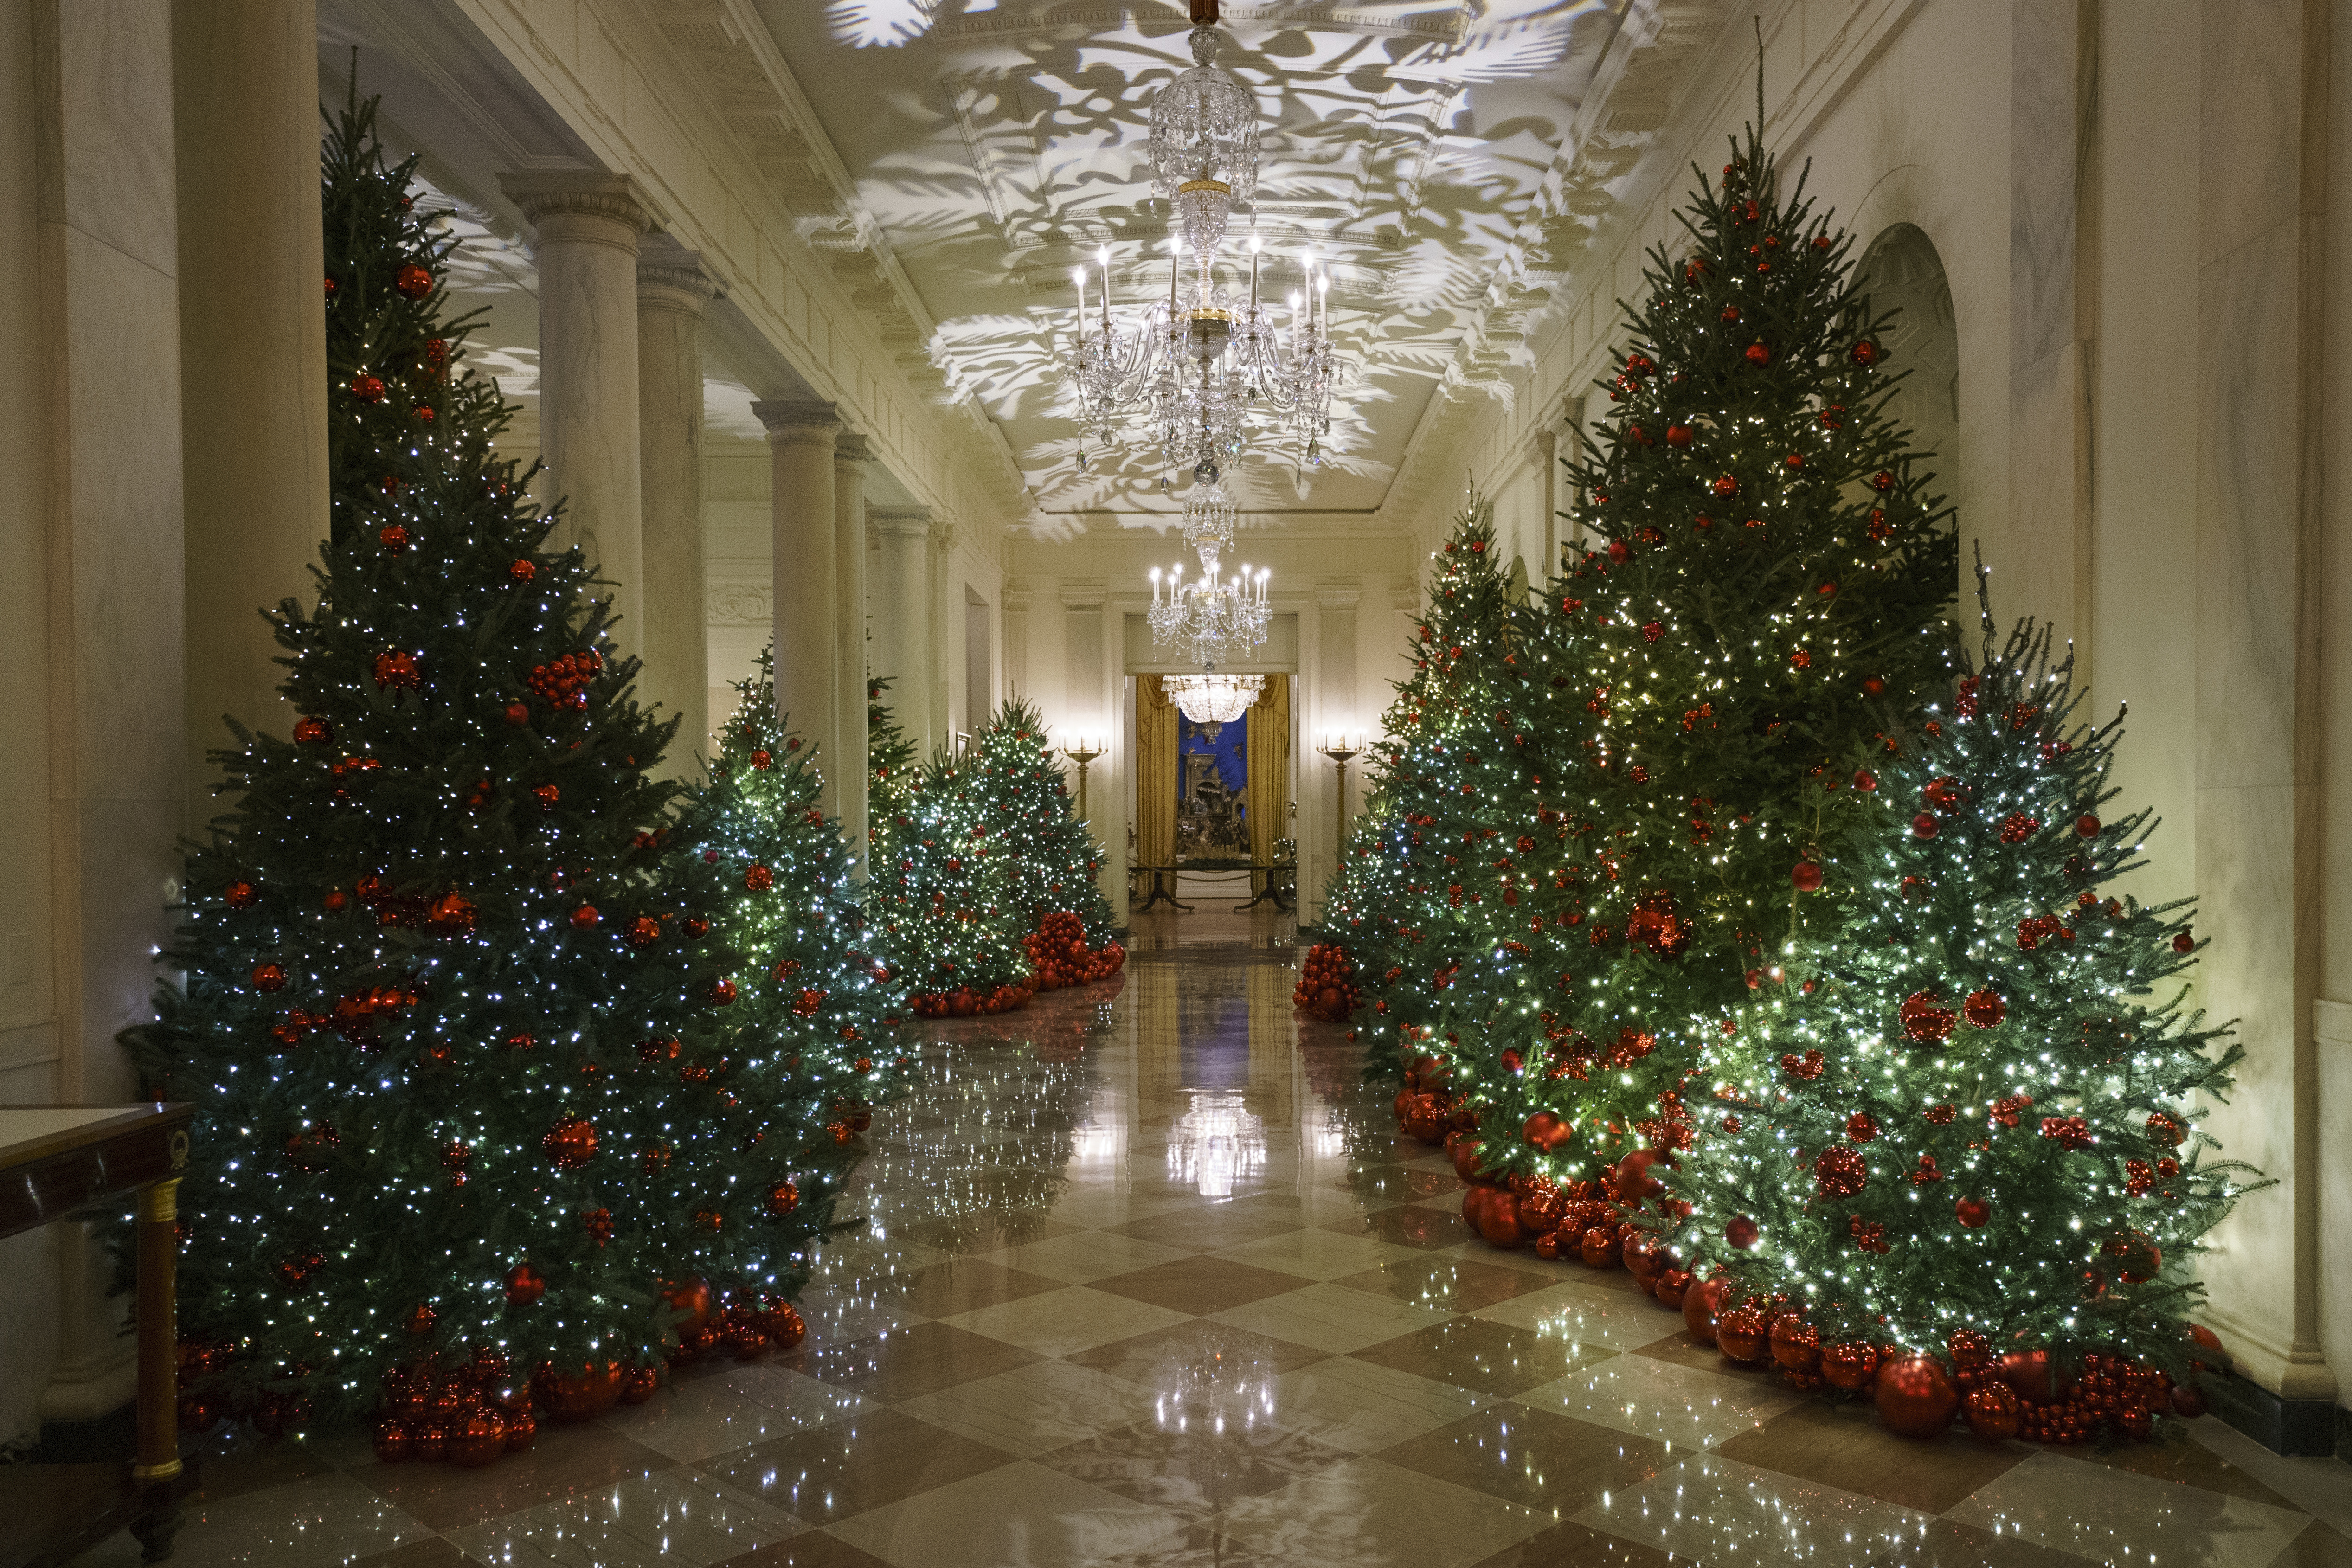 The Cross Hall during the 2018 Christmas press preview at the White House